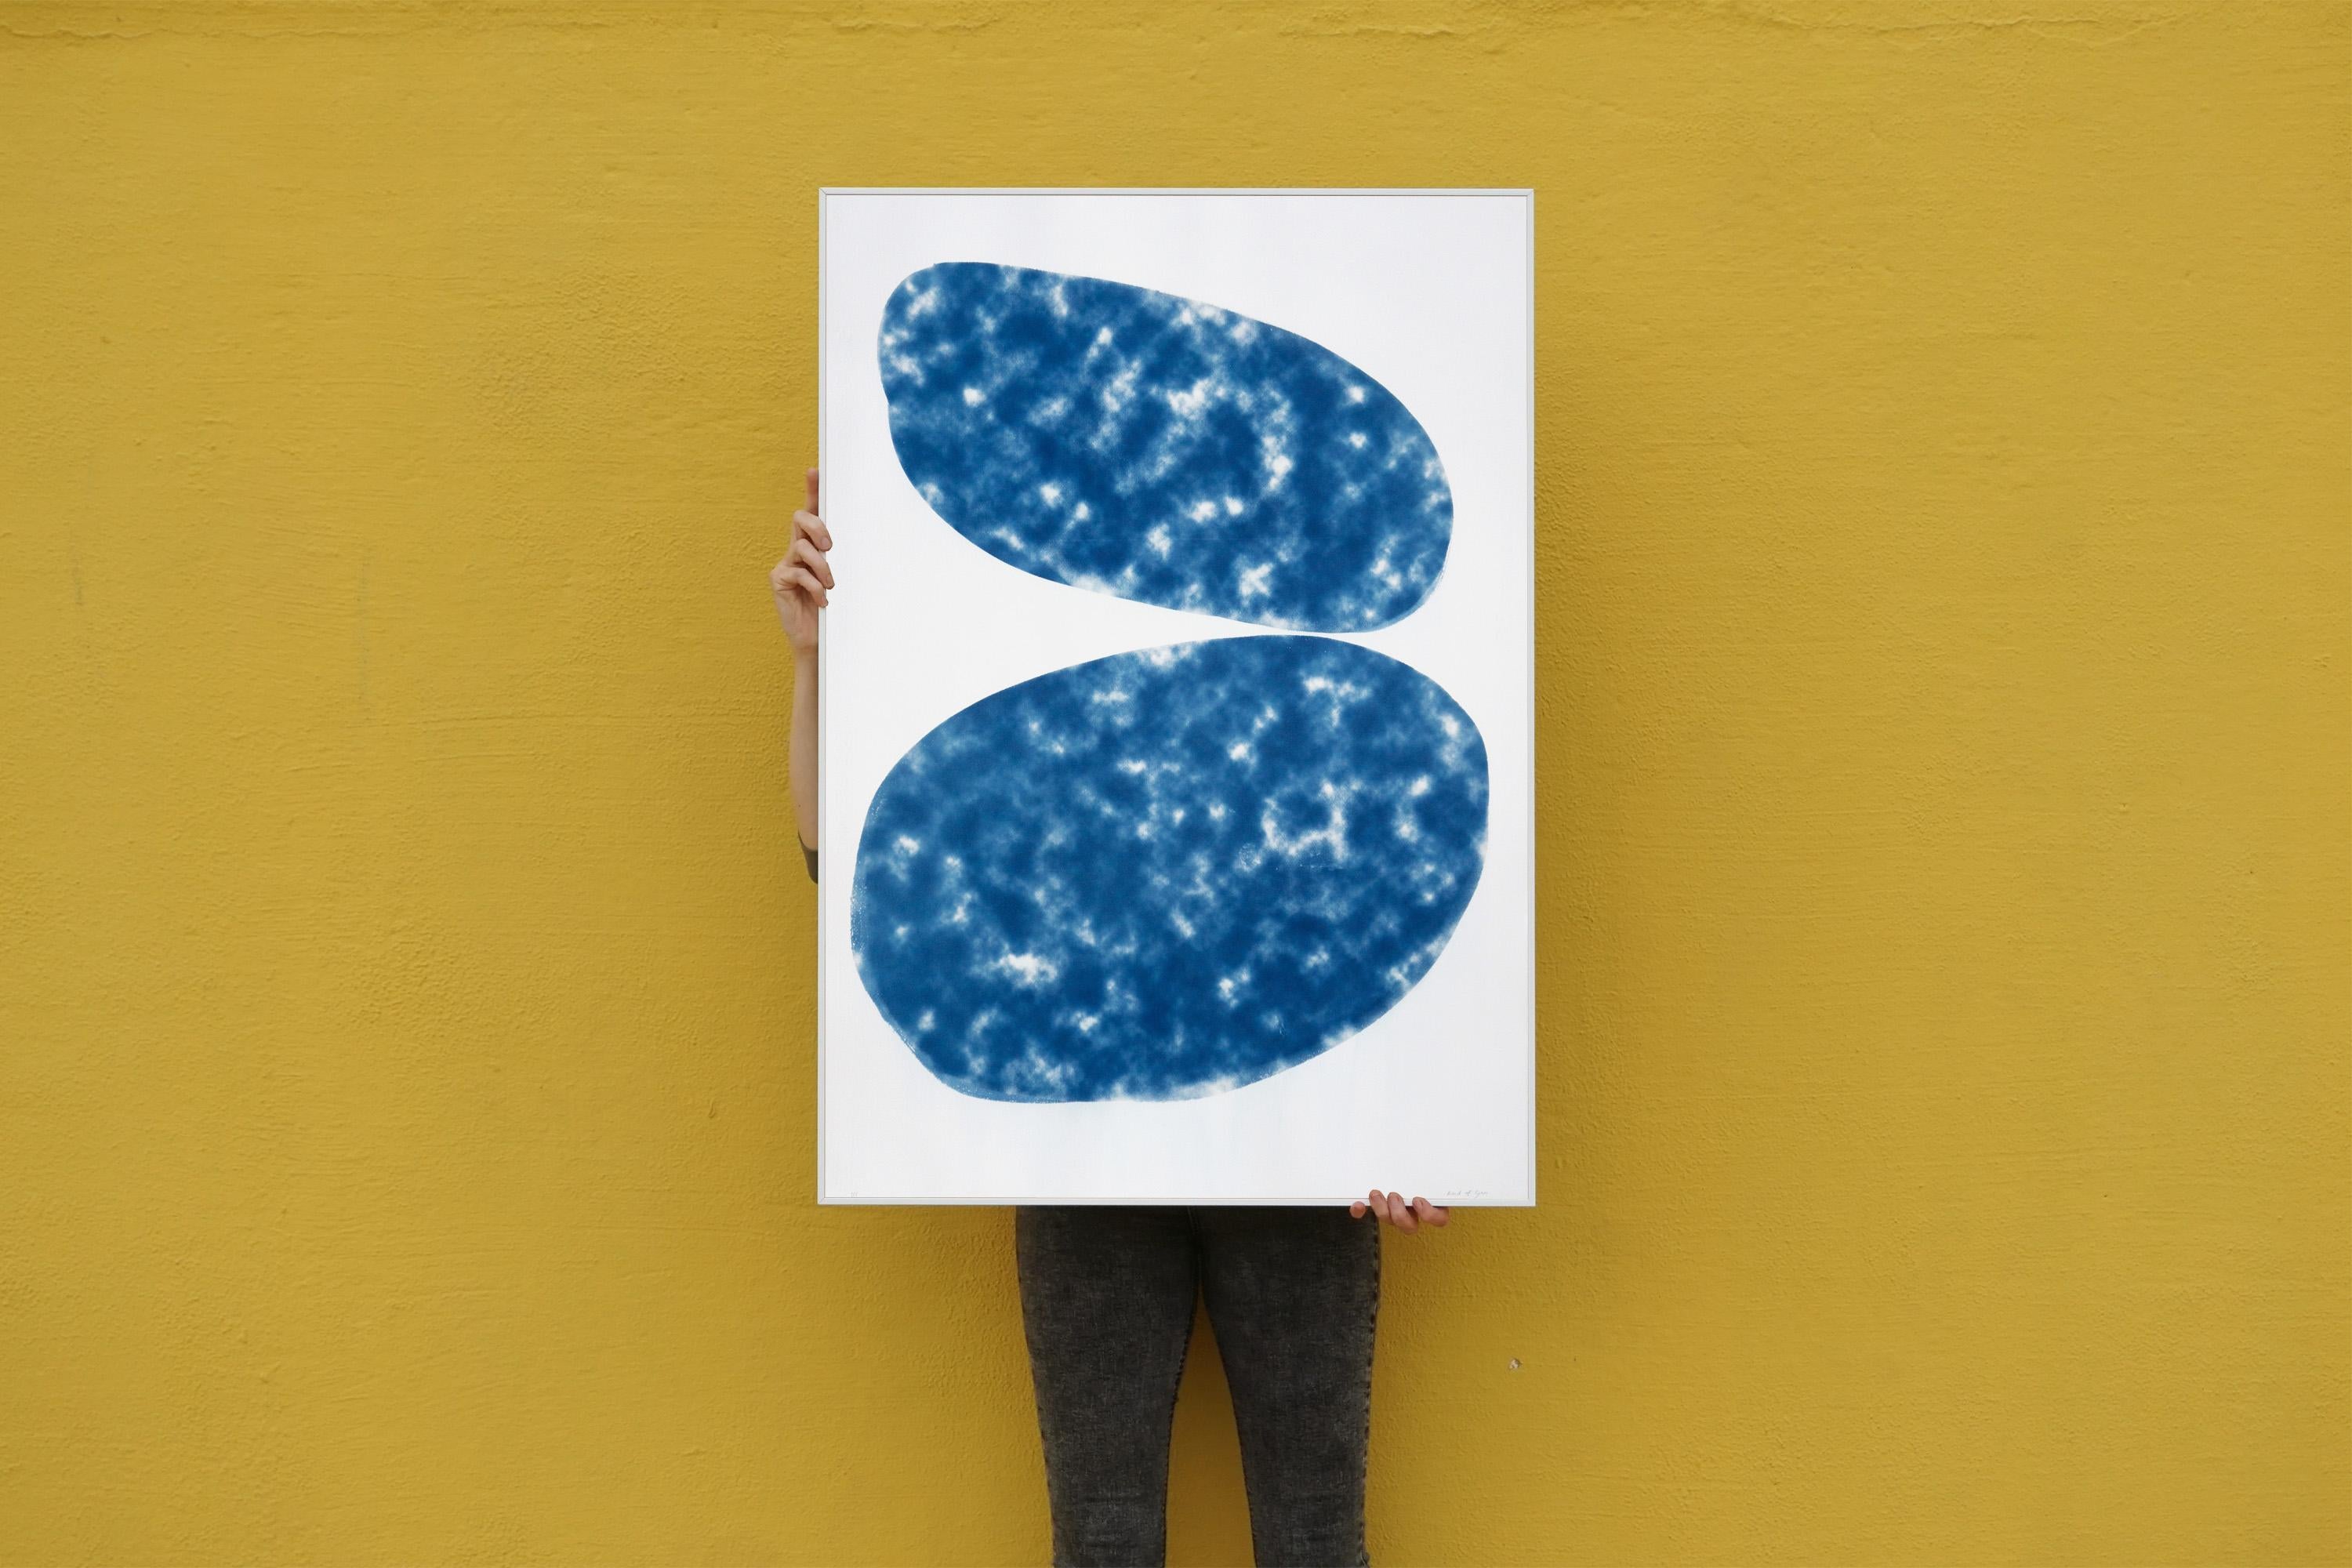 This is a unique cyanotype print of abstracted ovals. The emulsion was hand-painted and exposed using a textured photo negative. 

Please note that there are two small stains and a subtle line on the emulsion side of the print, thus the price